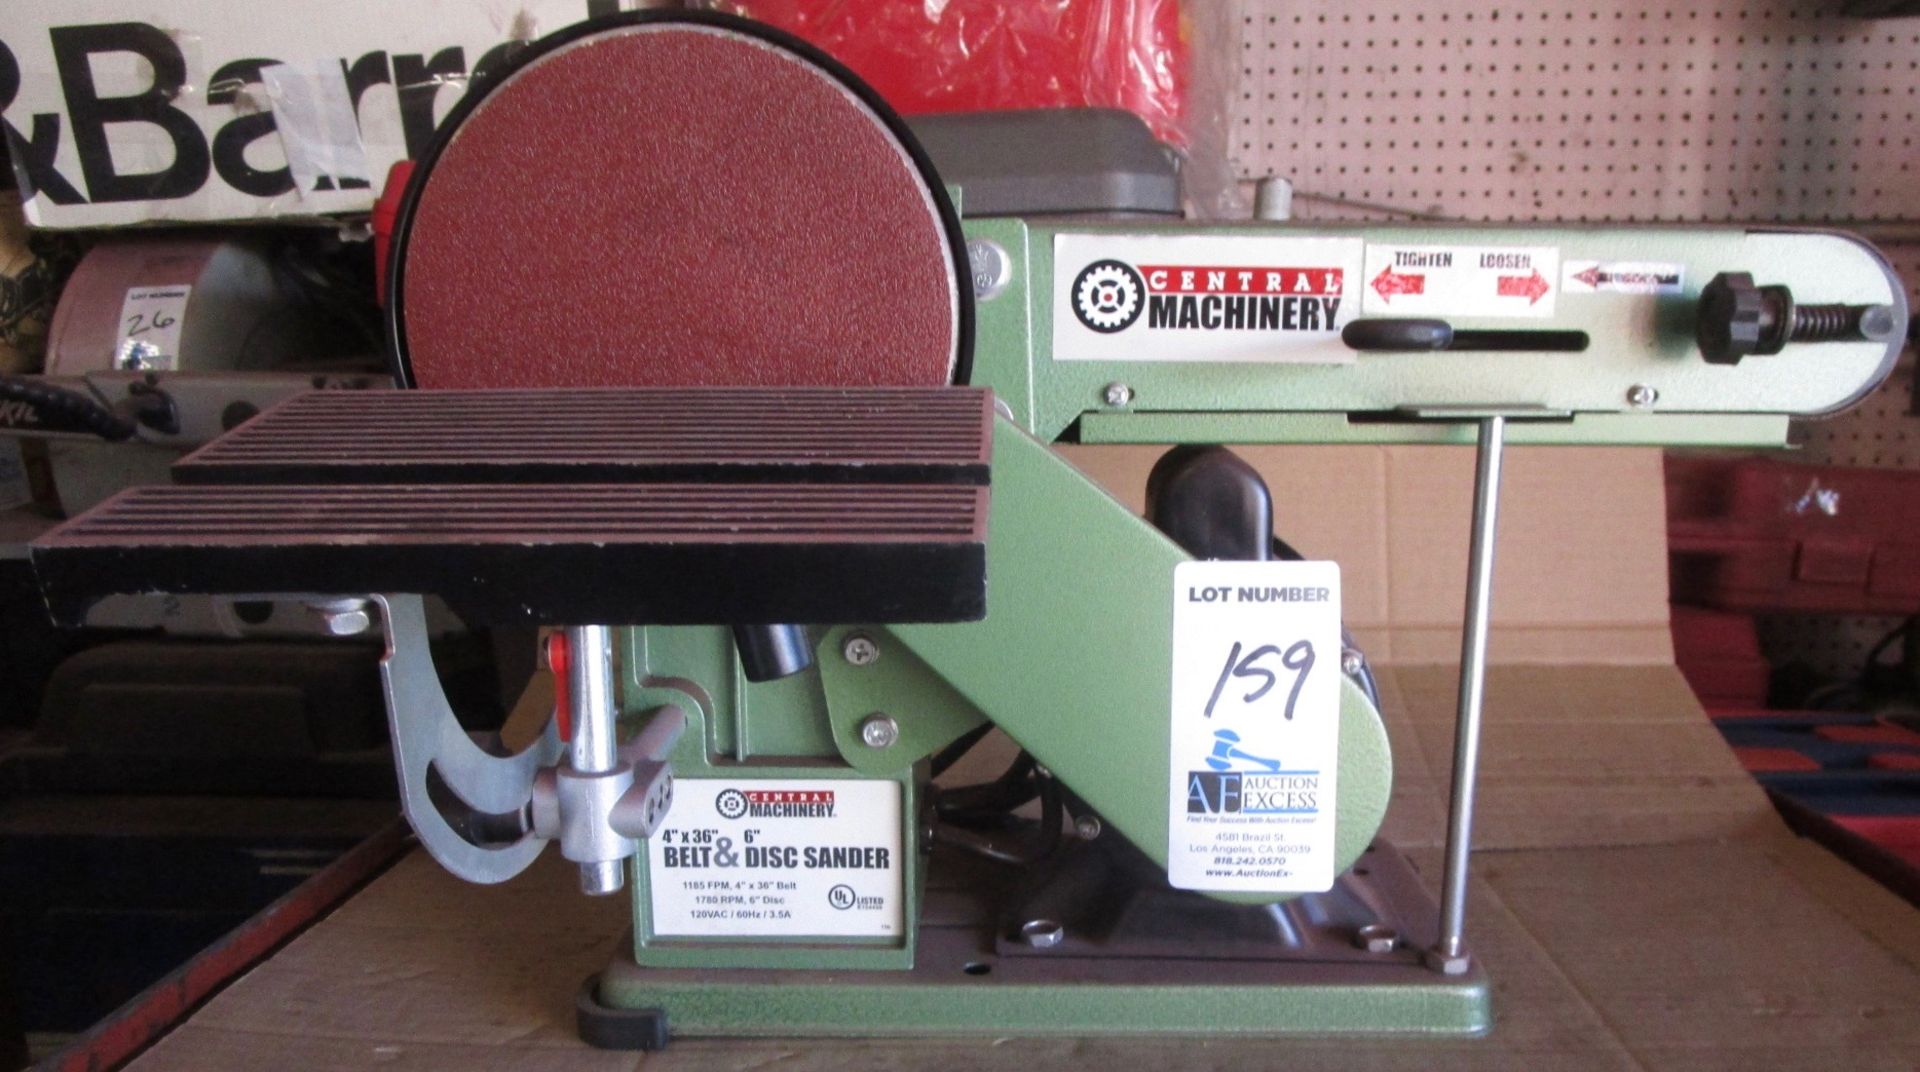 CENTRAL MACHINERY BELT AND DISC SANDER